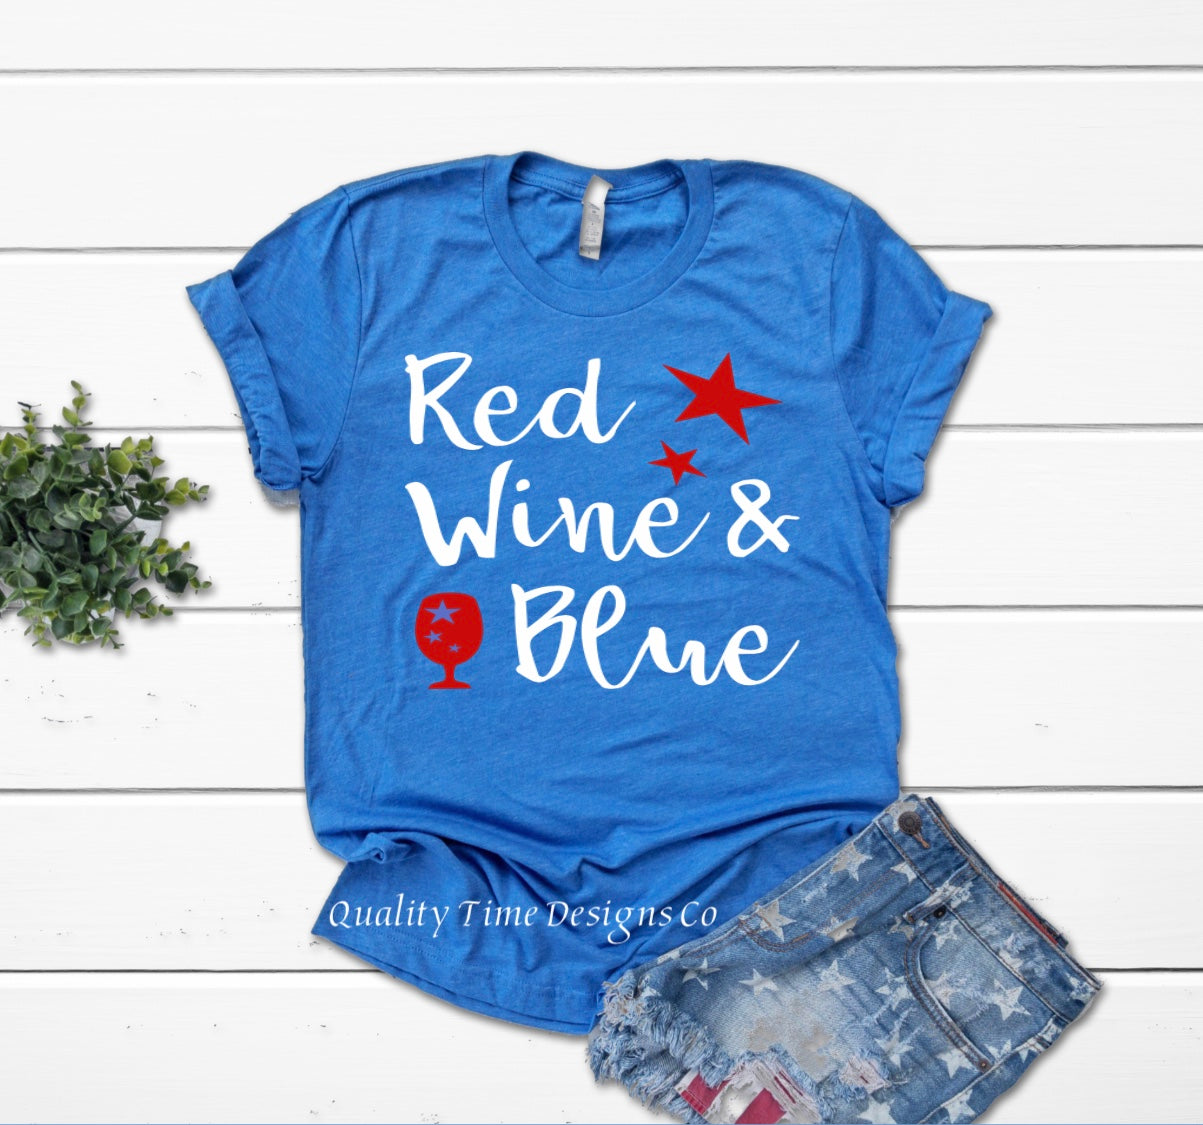 Red wine and blue t-shirt 